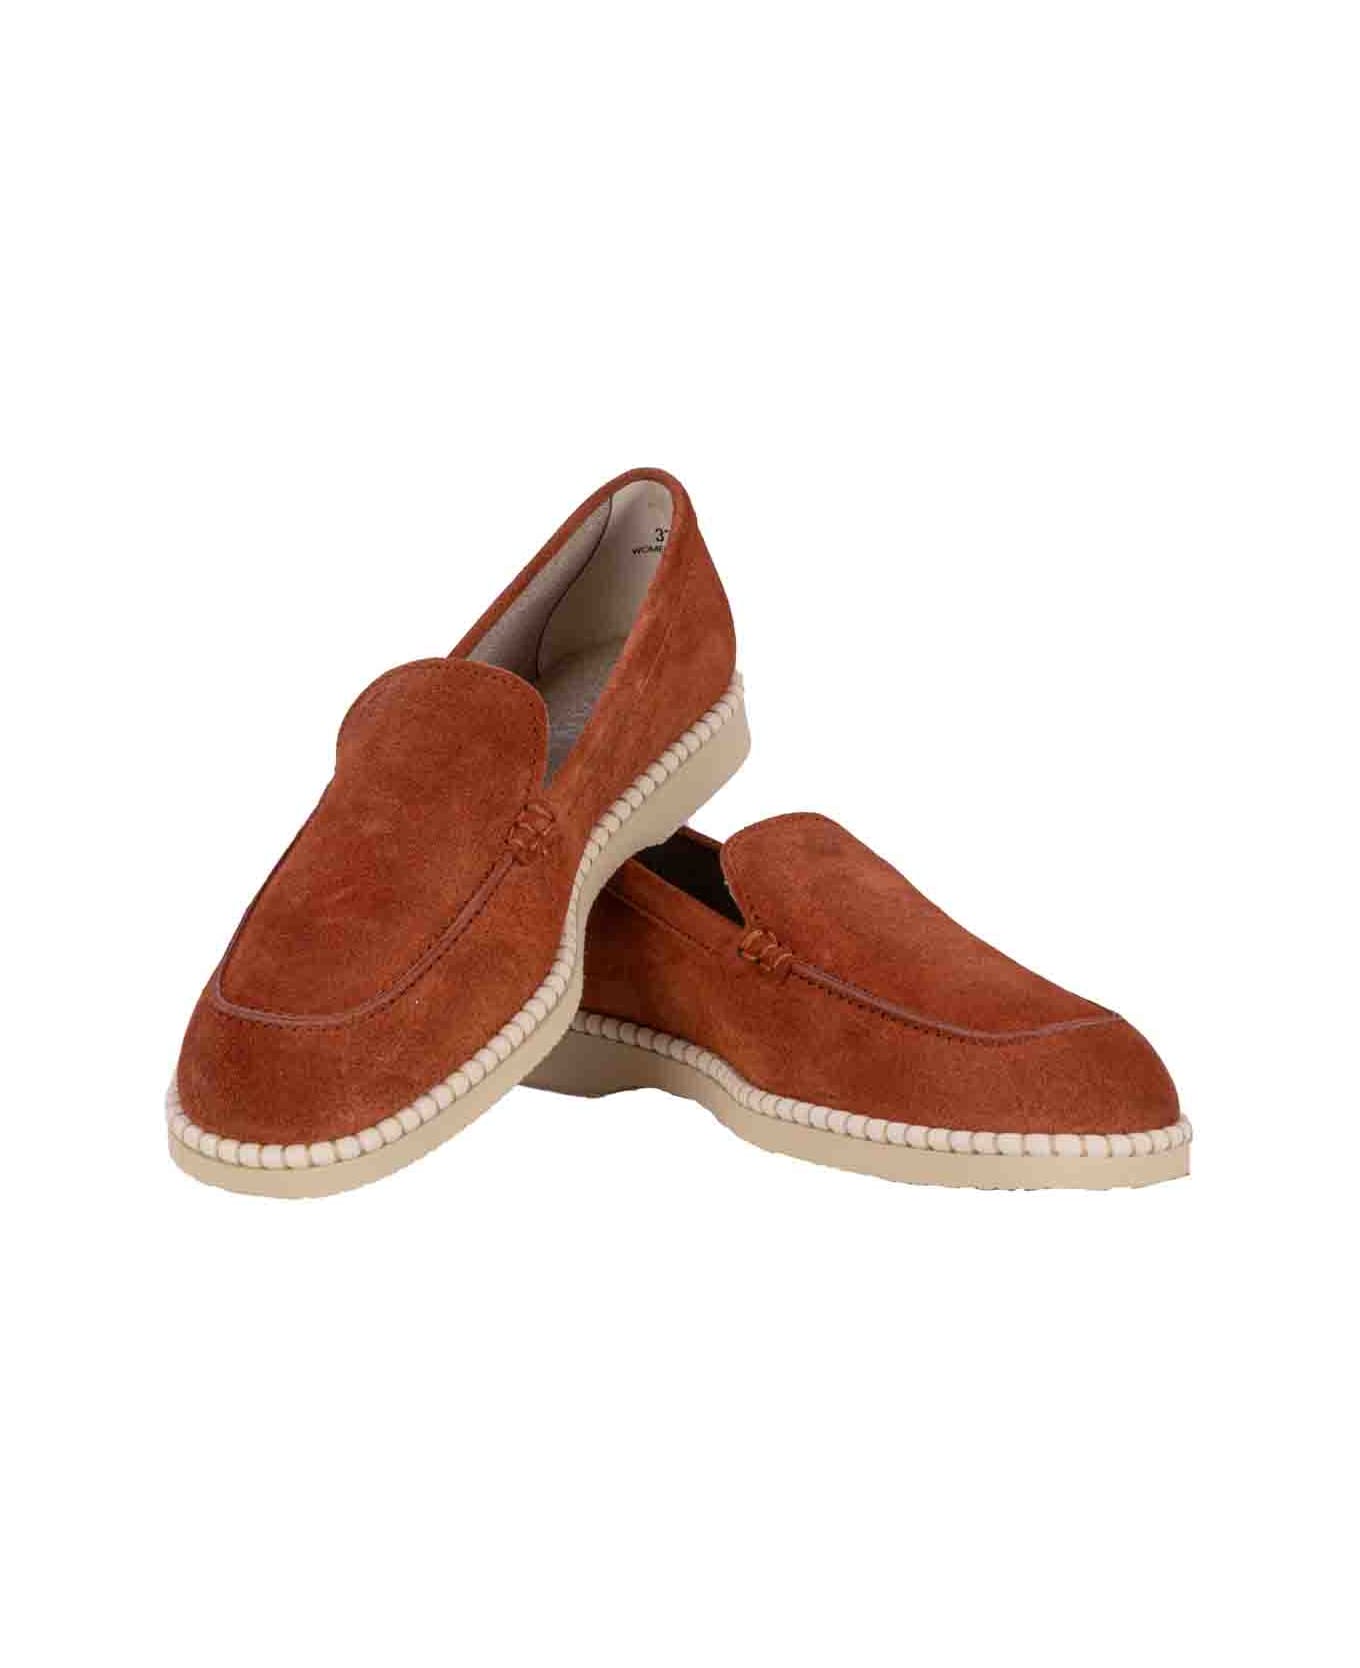 Hogan Leather Moccasin - Brown